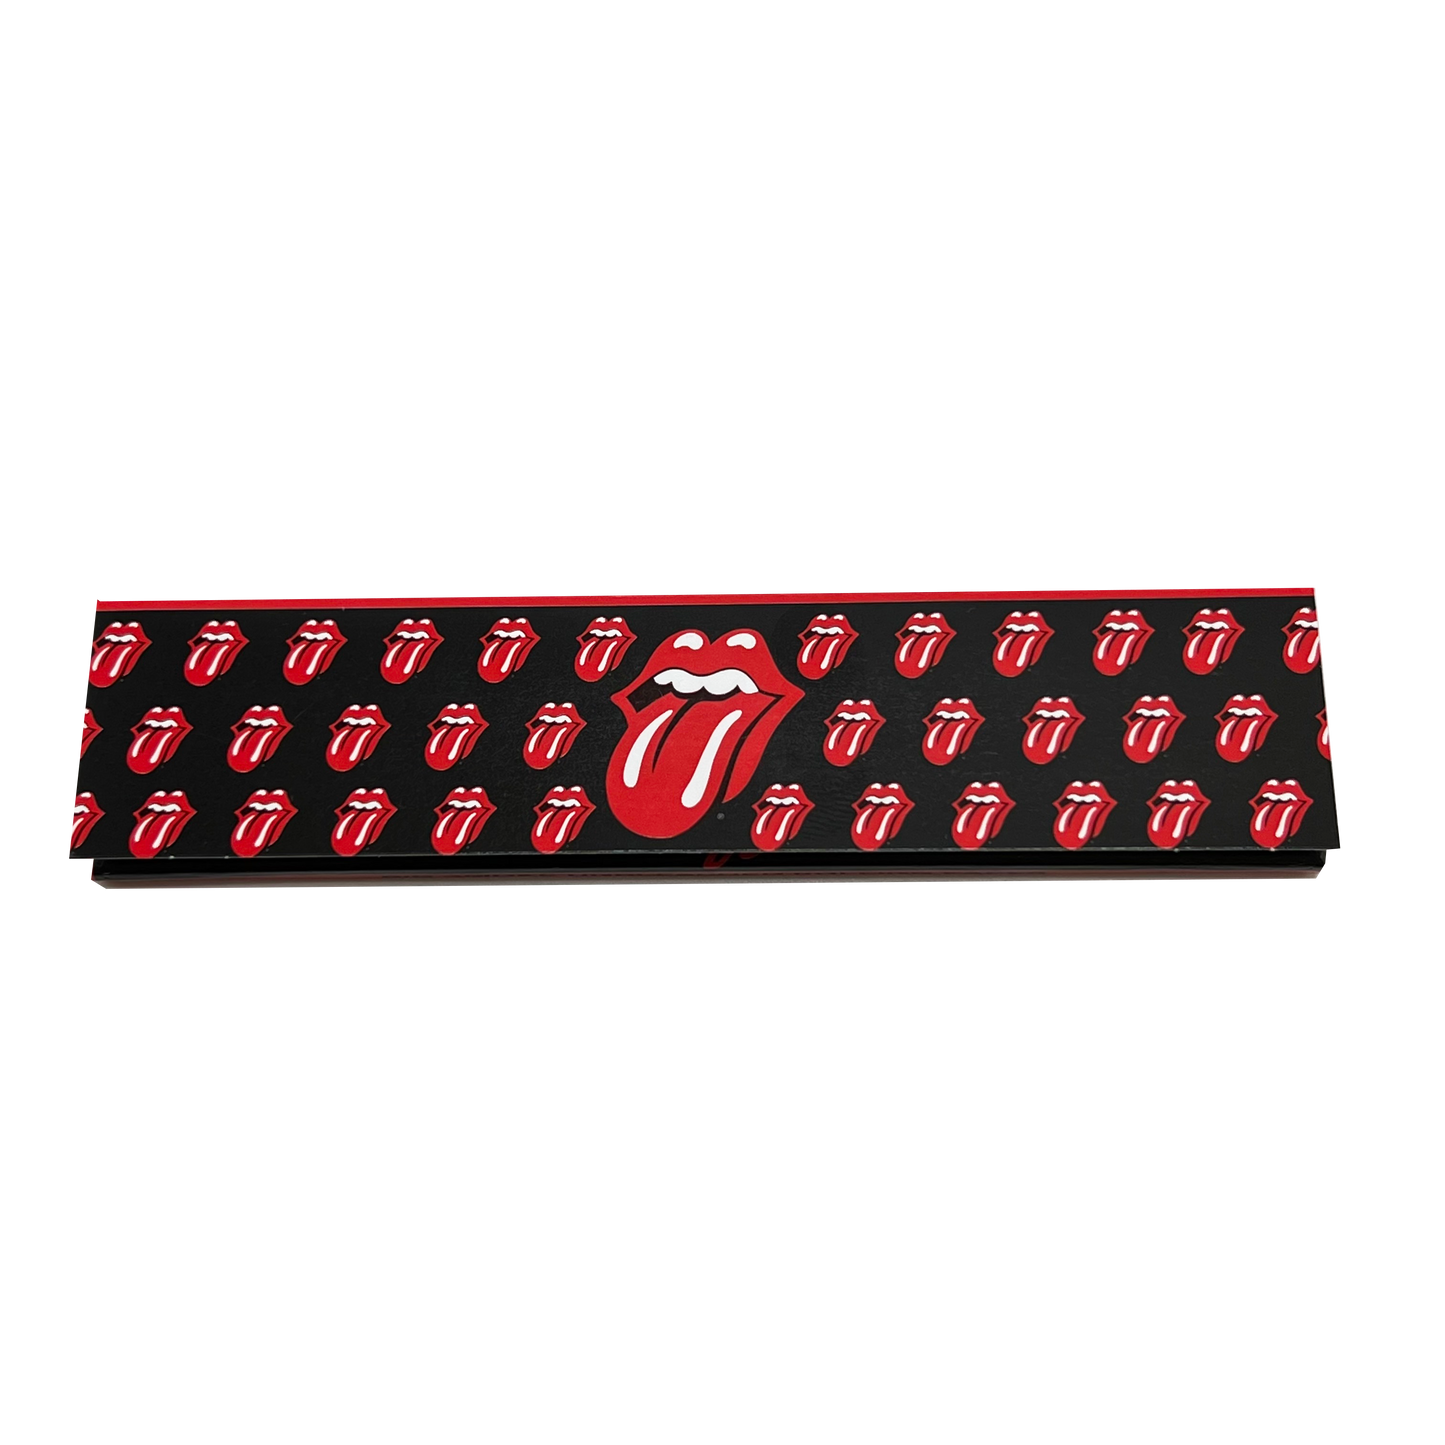 UNBLEACHED KING SIZE ROLLING STONES 50 UNIDADES